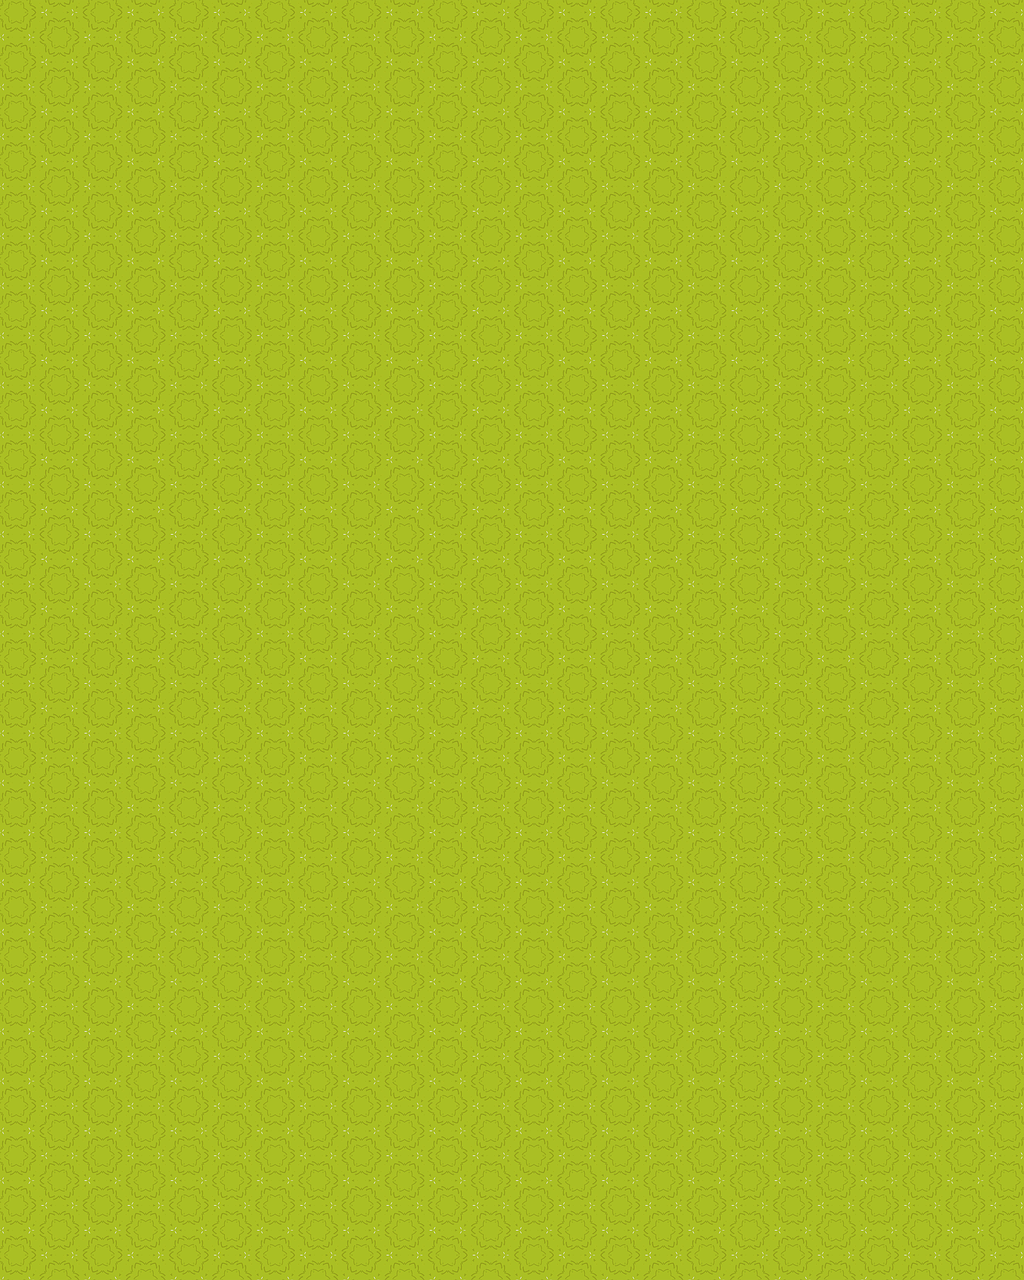 backgrounds lime green free photo